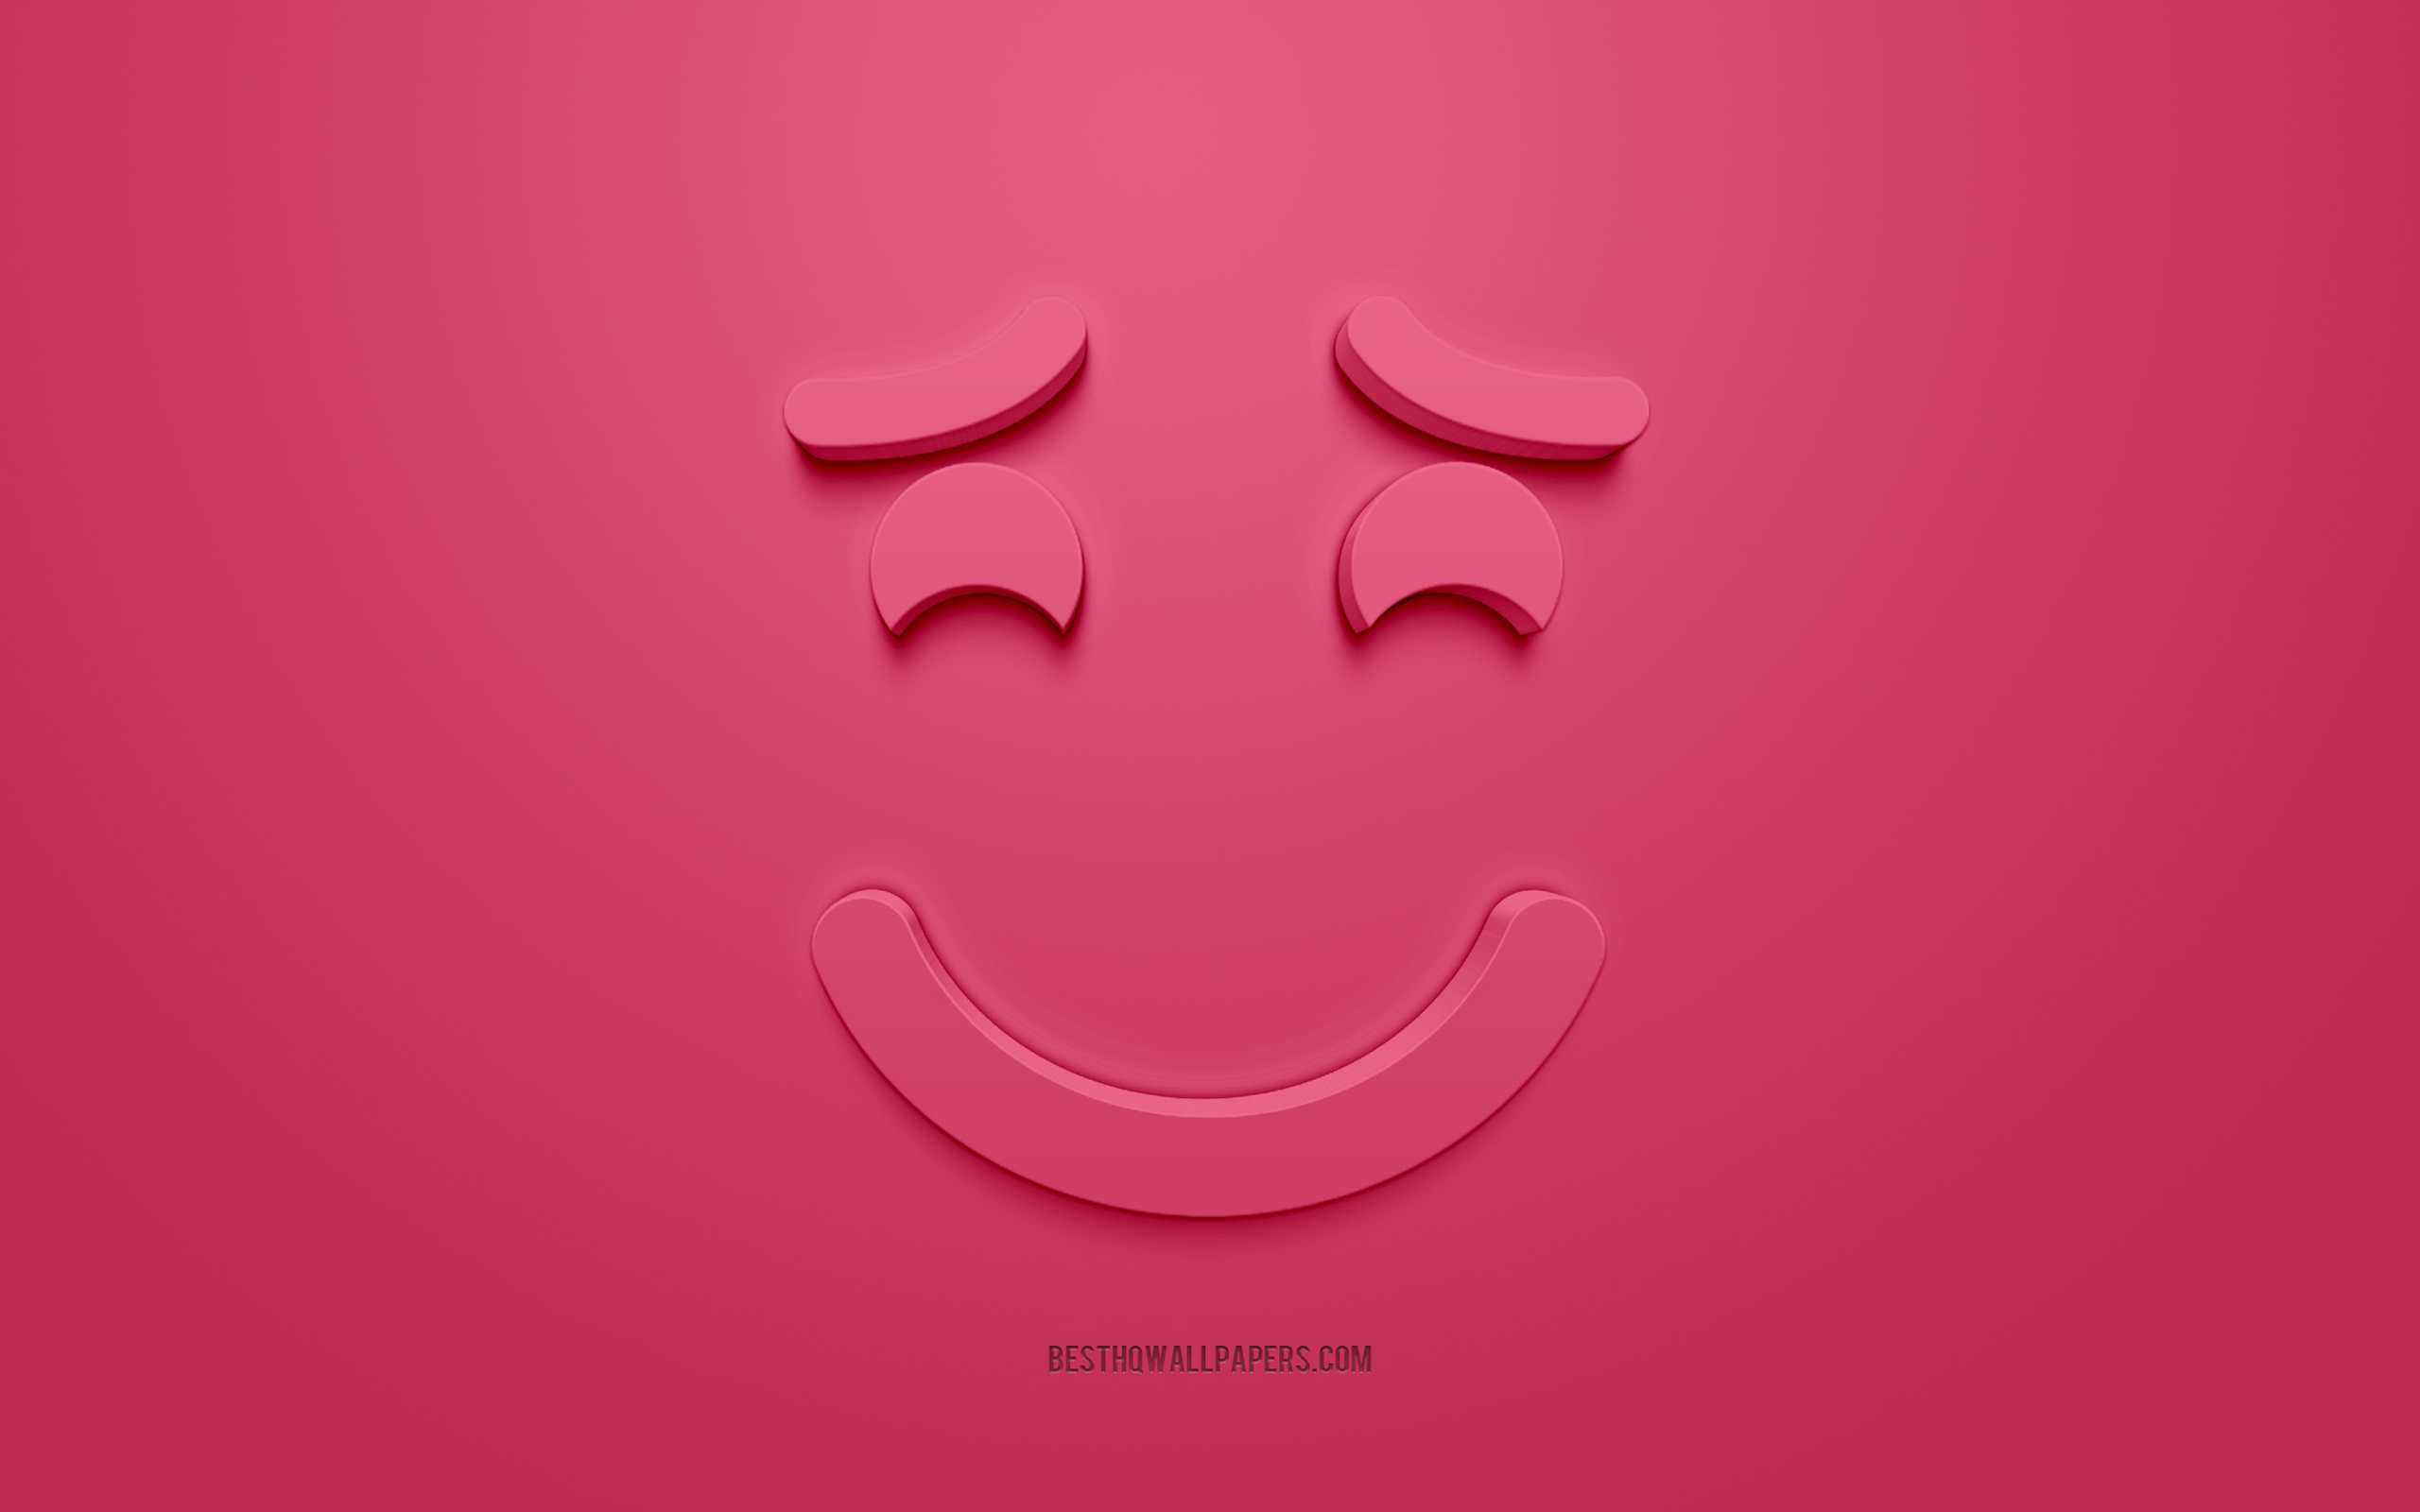 Smiling Emoticon With Raised Eyebrows, 3d Smiley, Shy - Smiley Face Smiley 3d - HD Wallpaper 